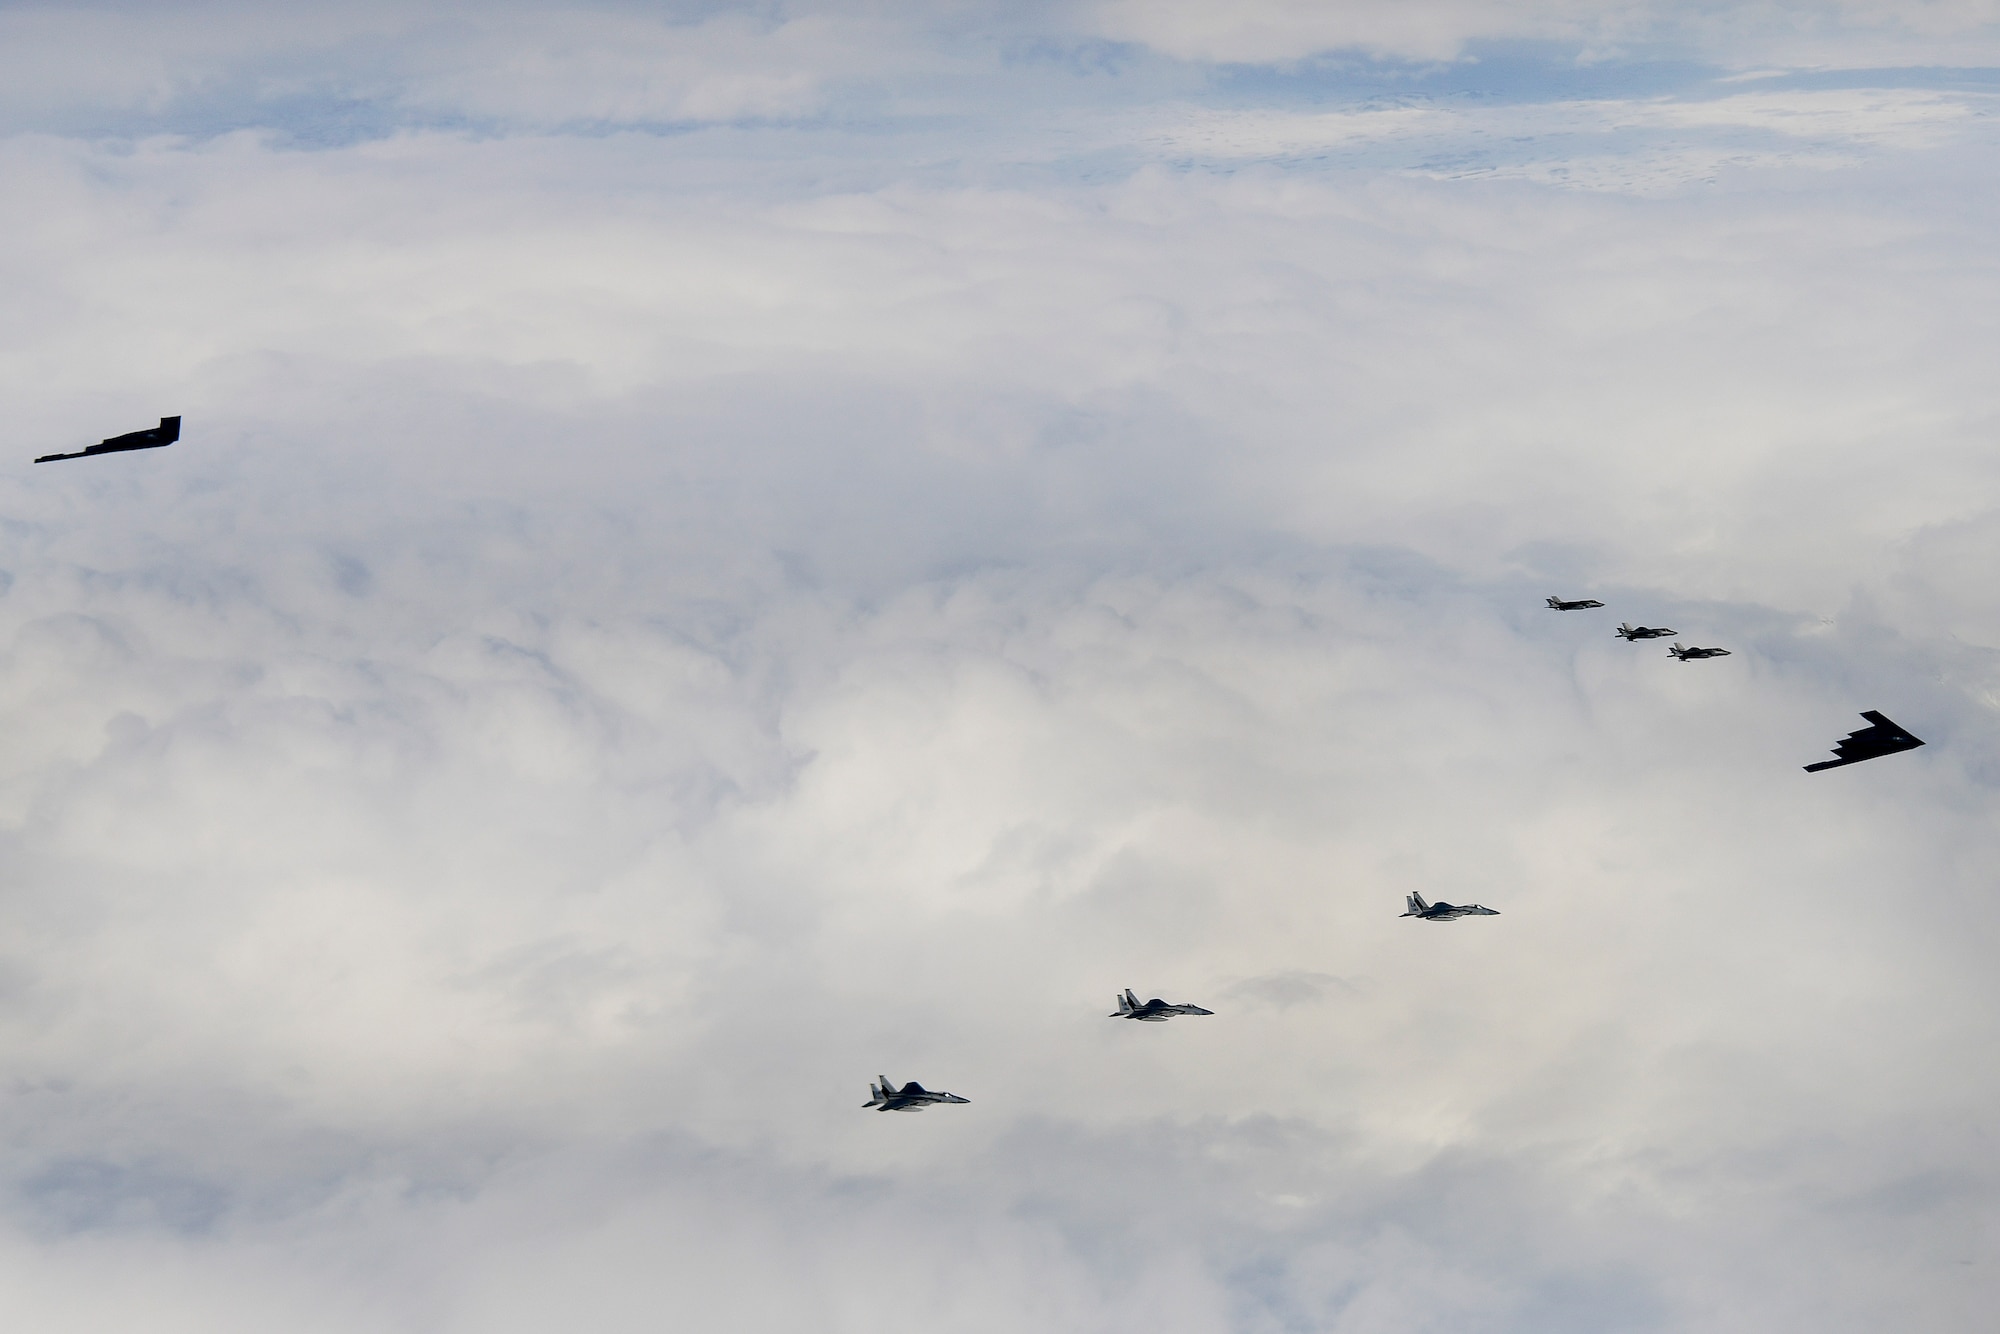 B-2A Spirit bombers assigned to the 509th Bomb Wing, F-15C Eagles assigned to the 48th Fighter Wing and Royal Norwegian Air Force F-35A aircraft conduct aerial operations in support of Bomber Task Force Europe 20-2 over Keflavik, Iceland, March 16, 2020. Bomber missions enable aircrews to maintain a high state of readiness and proficiency, and validate U.S. global strike capability. (U.S. Air Force photo/ Master Sgt. Matthew Plew)